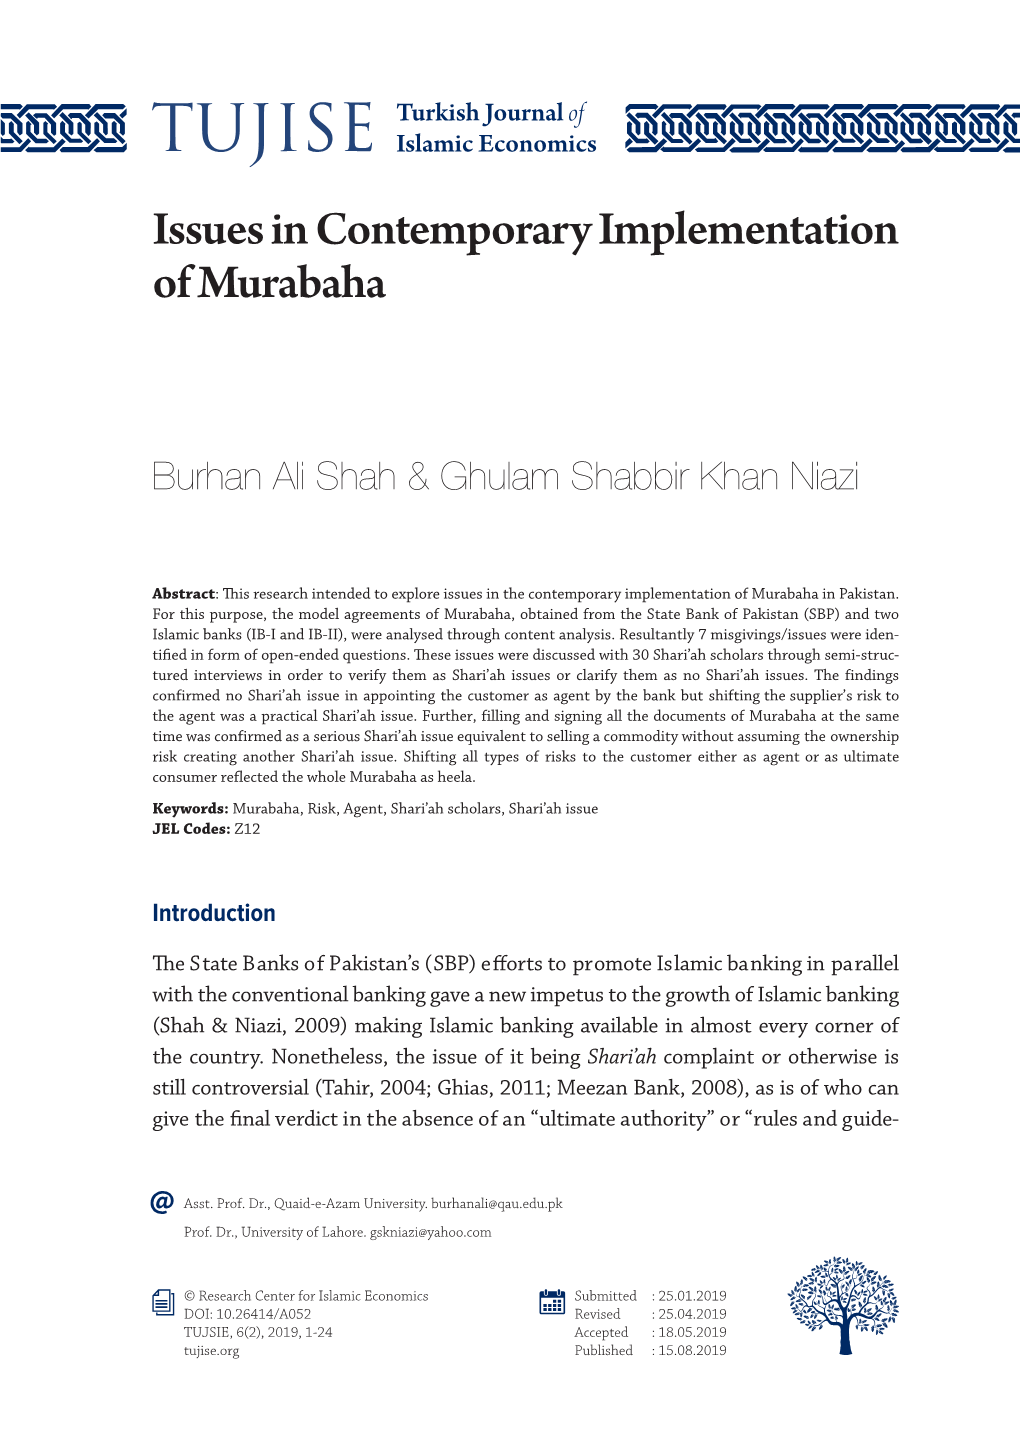 Issues in Contemporary Implementation of Murabaha